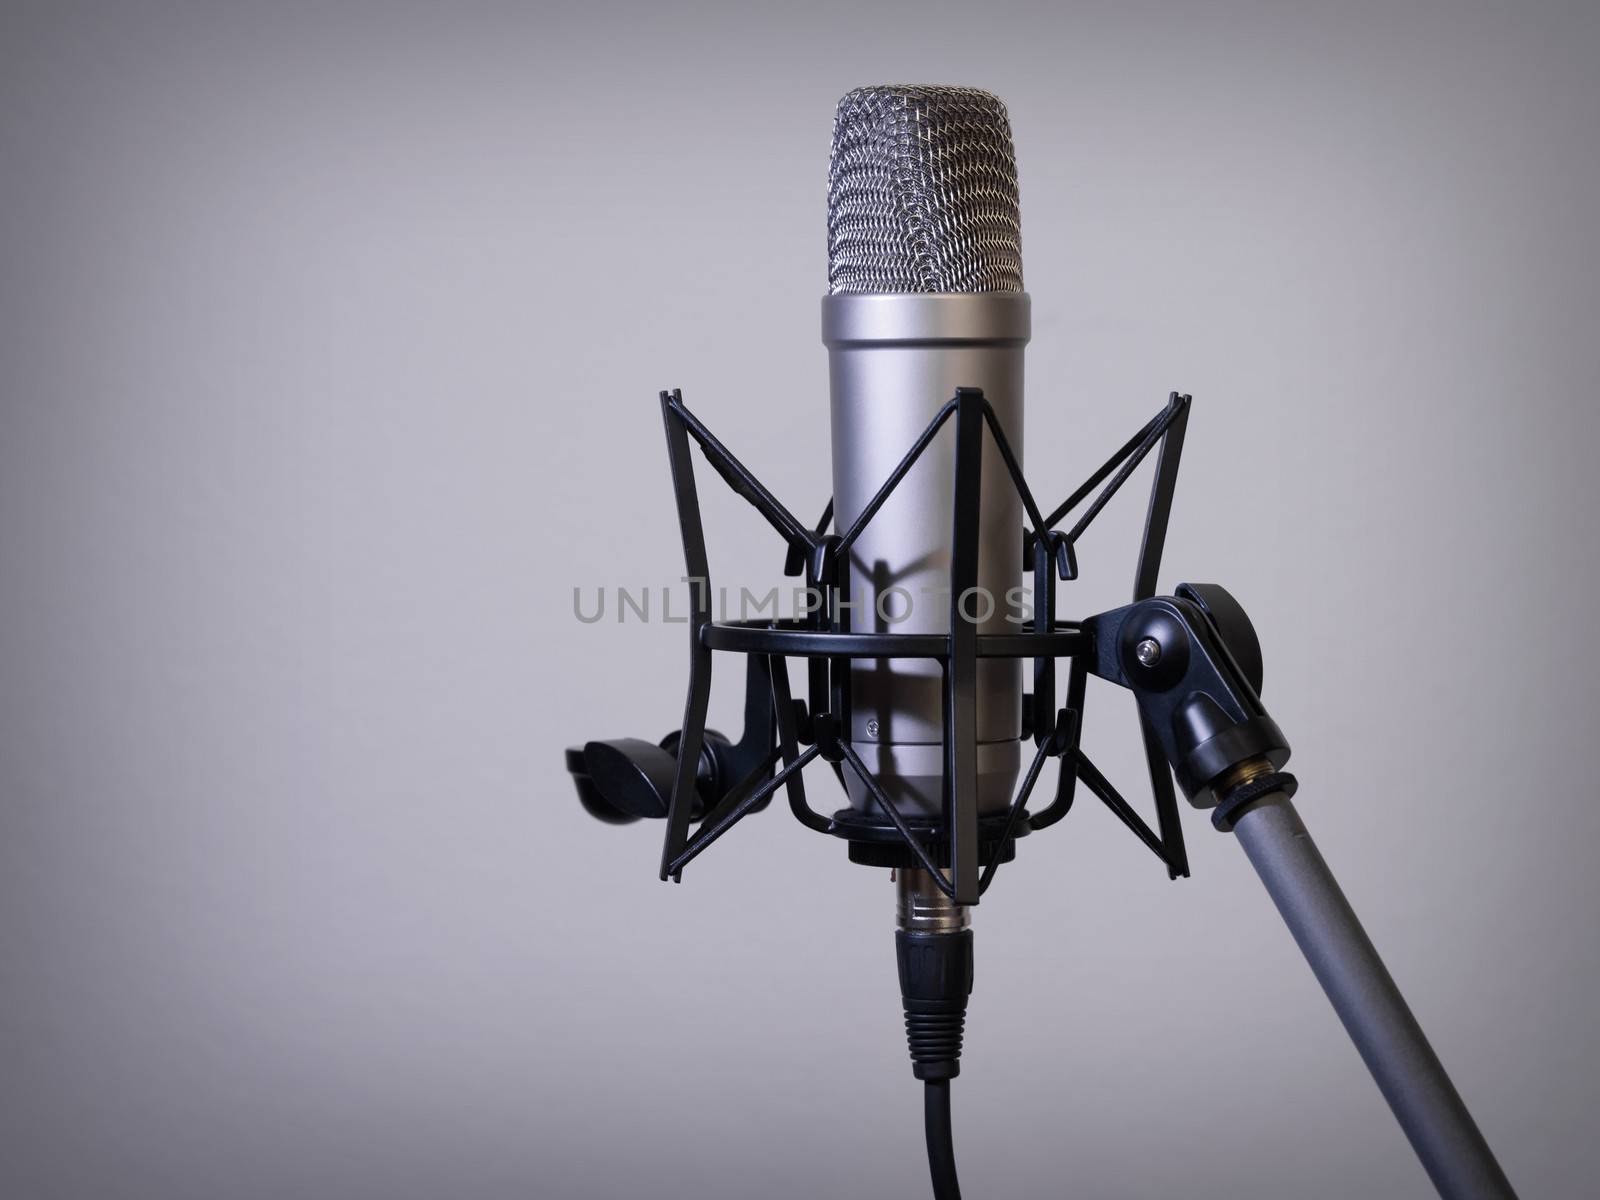 Photo of a large diaphragm studio microphone on a mic stand.
